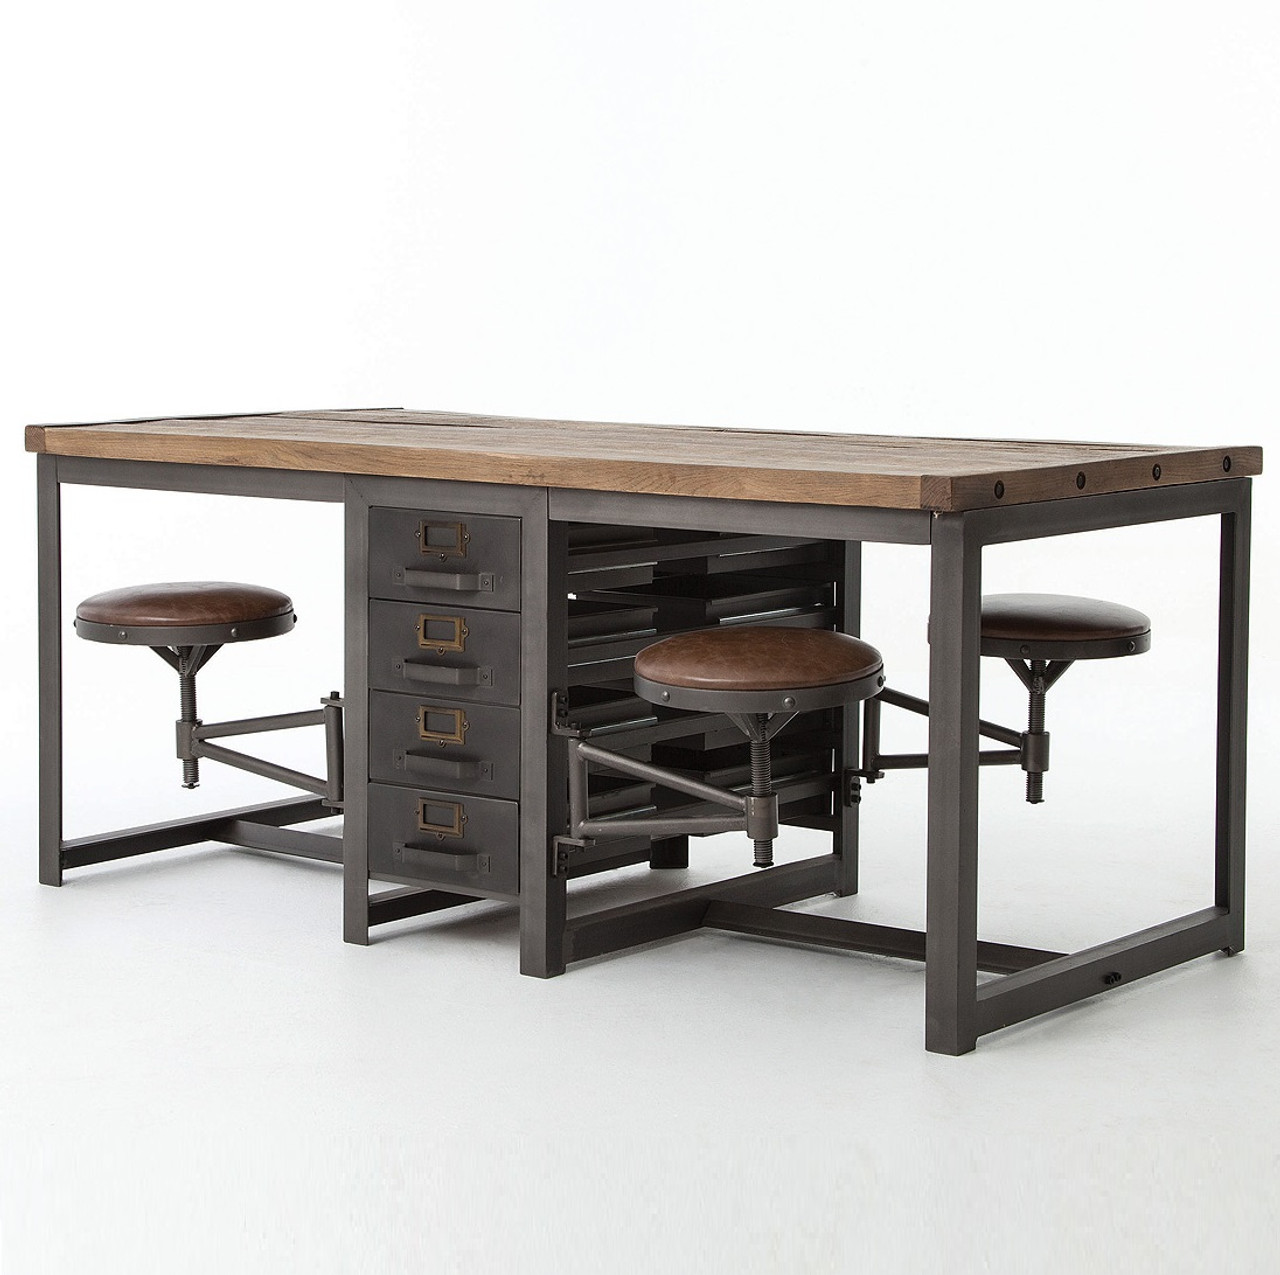 Rupert Industrial Architect Work Table Desk With Attached ...